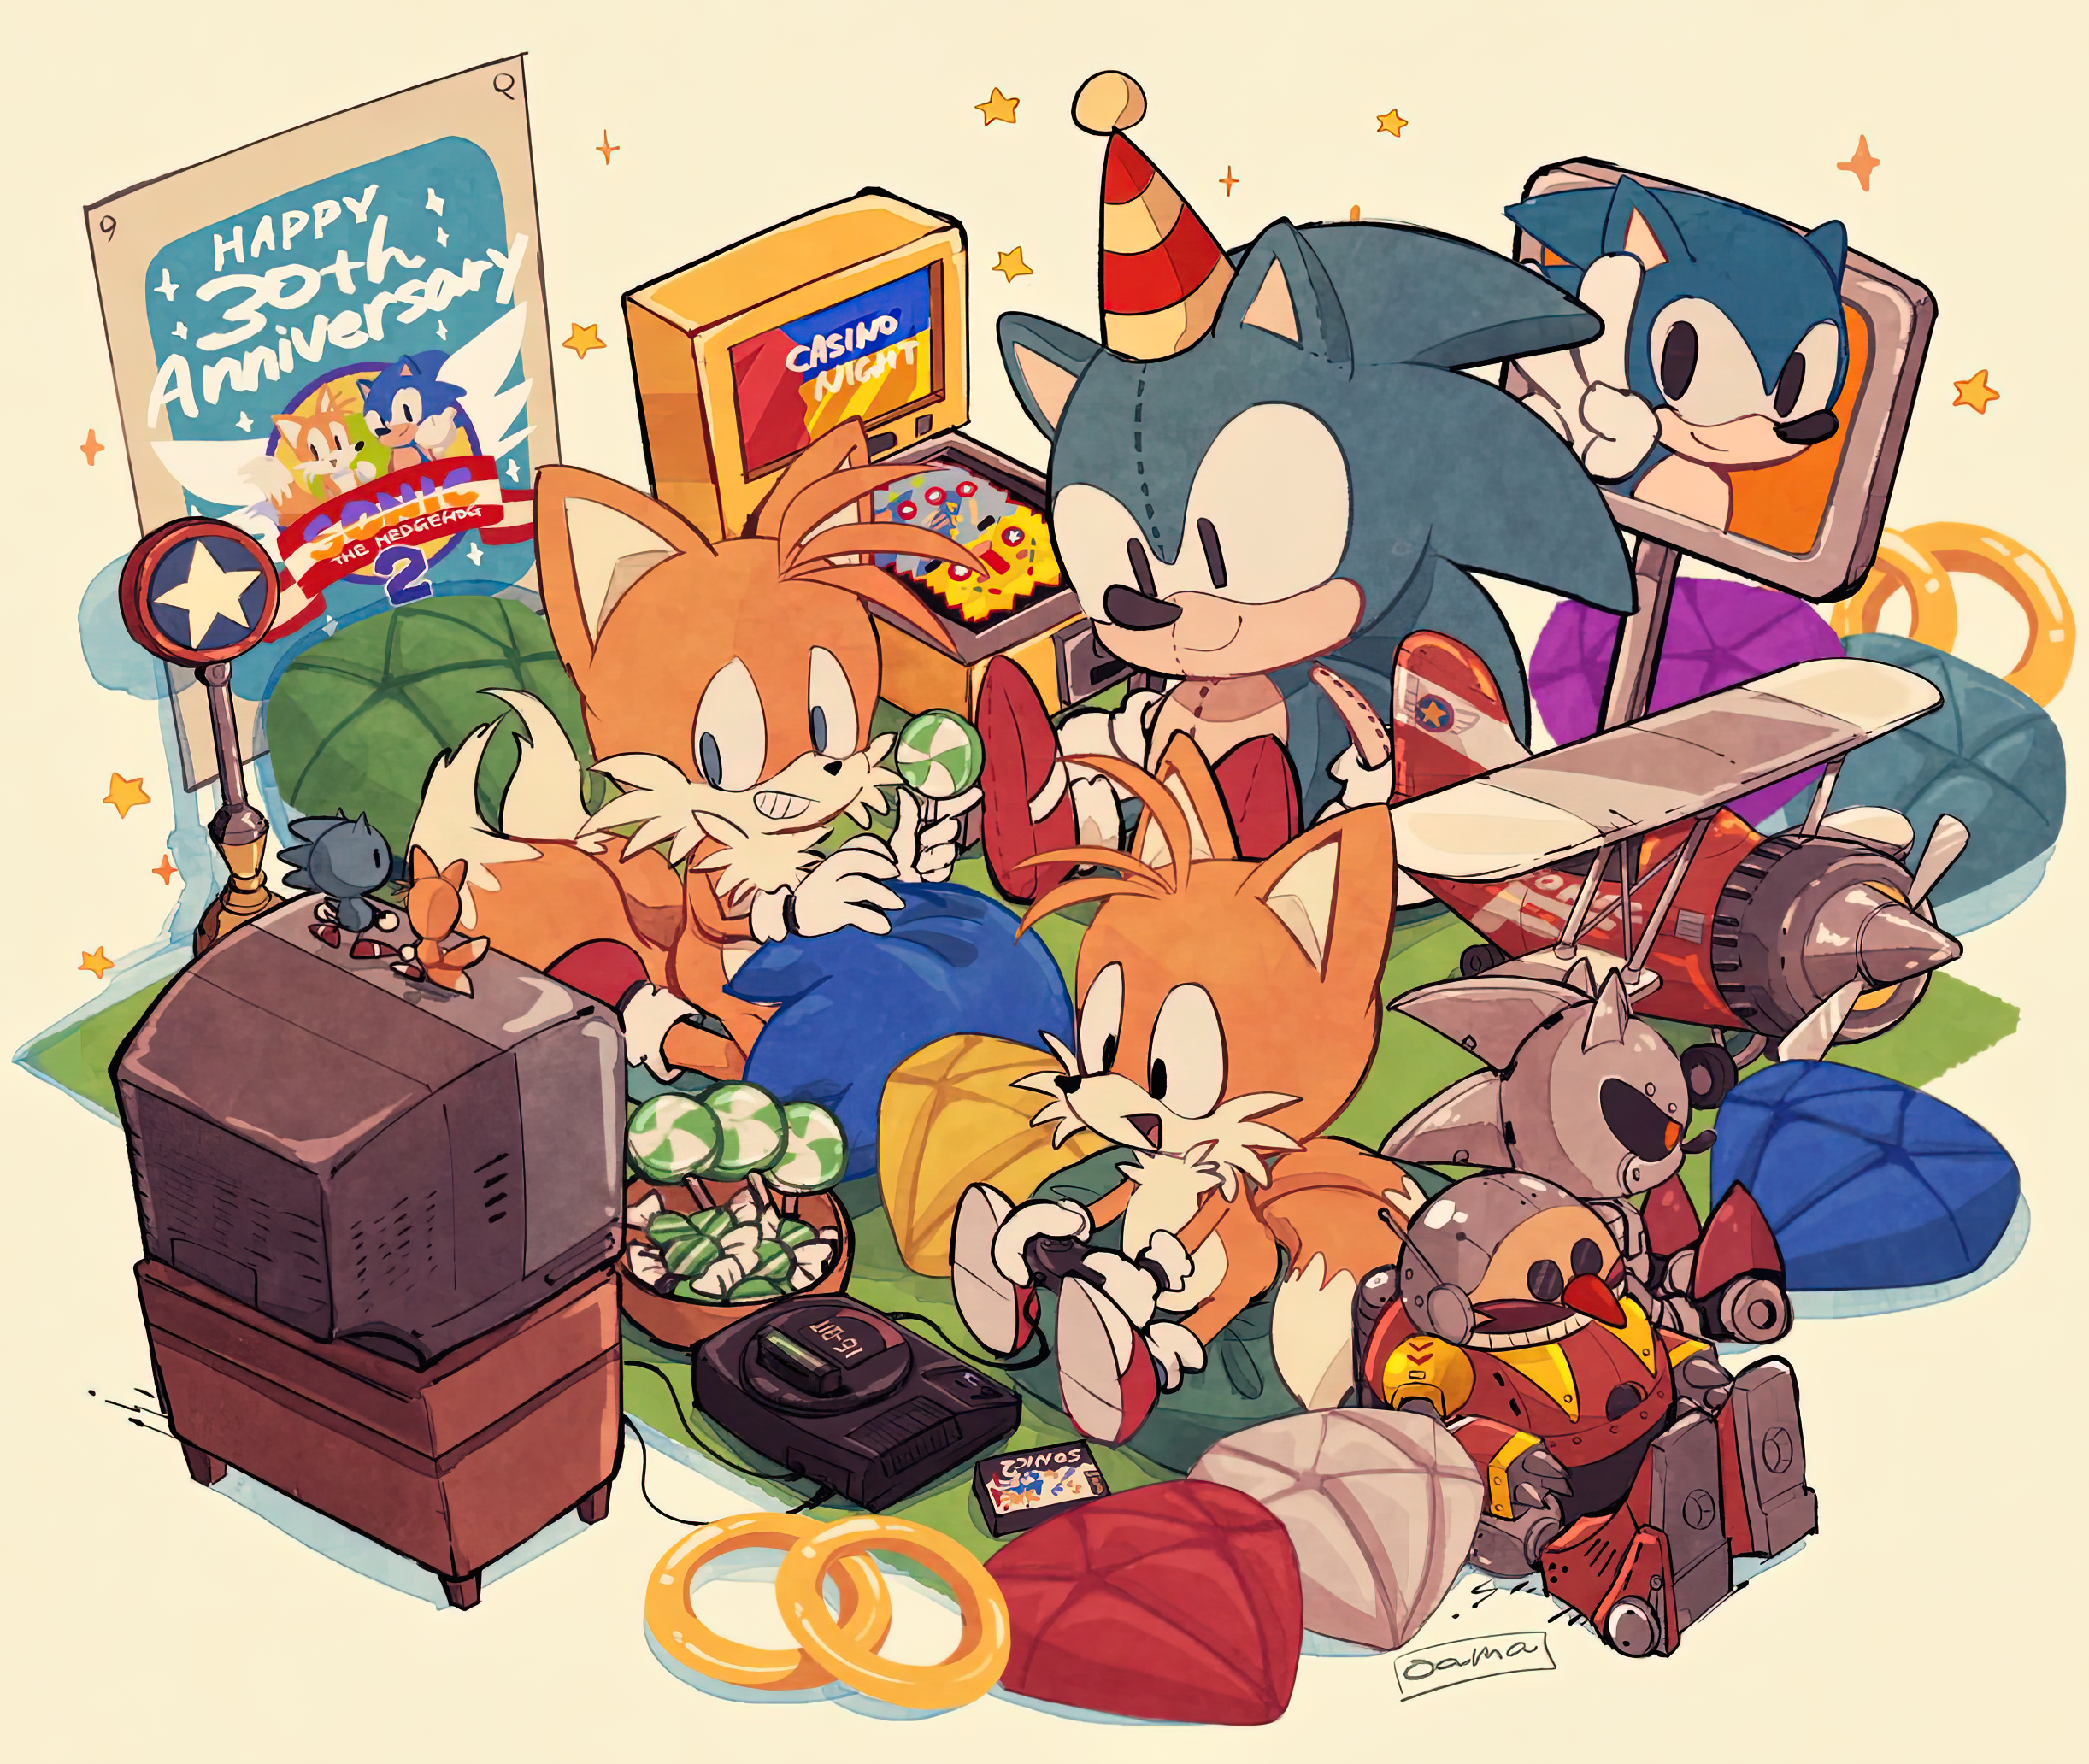 General 2444x2064 Sonic Sonic the Hedgehog Tails (character) Sega video game art video game characters PC gaming Sonic 2 Sonic 3 Dreamcast lollipop cushions pillow 1990s toys retro console retro style retro games rings artwork video games sega genesis sega saturn simple background